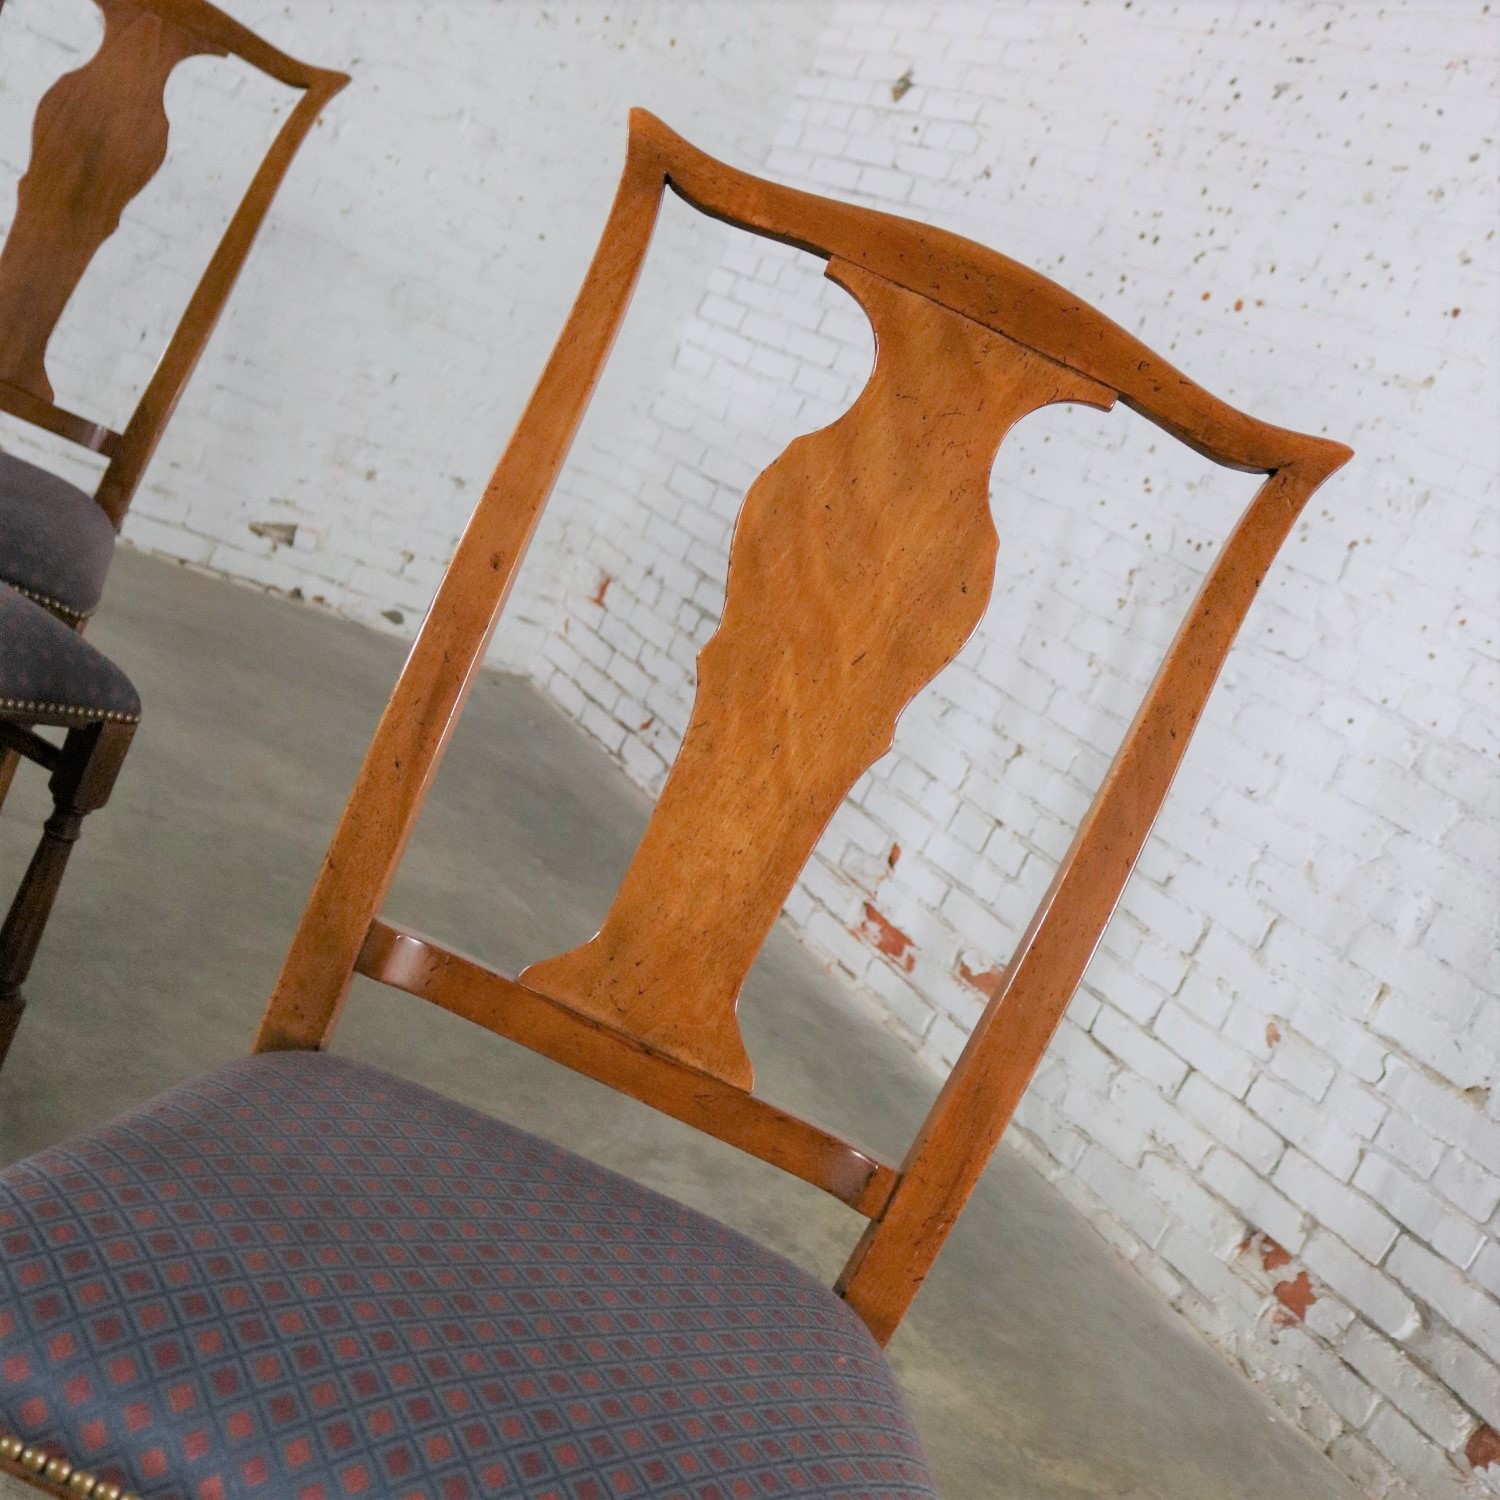 Baker Chippendale Style Dining Chairs with Solid Splat and Turned Front Legs Set of Six